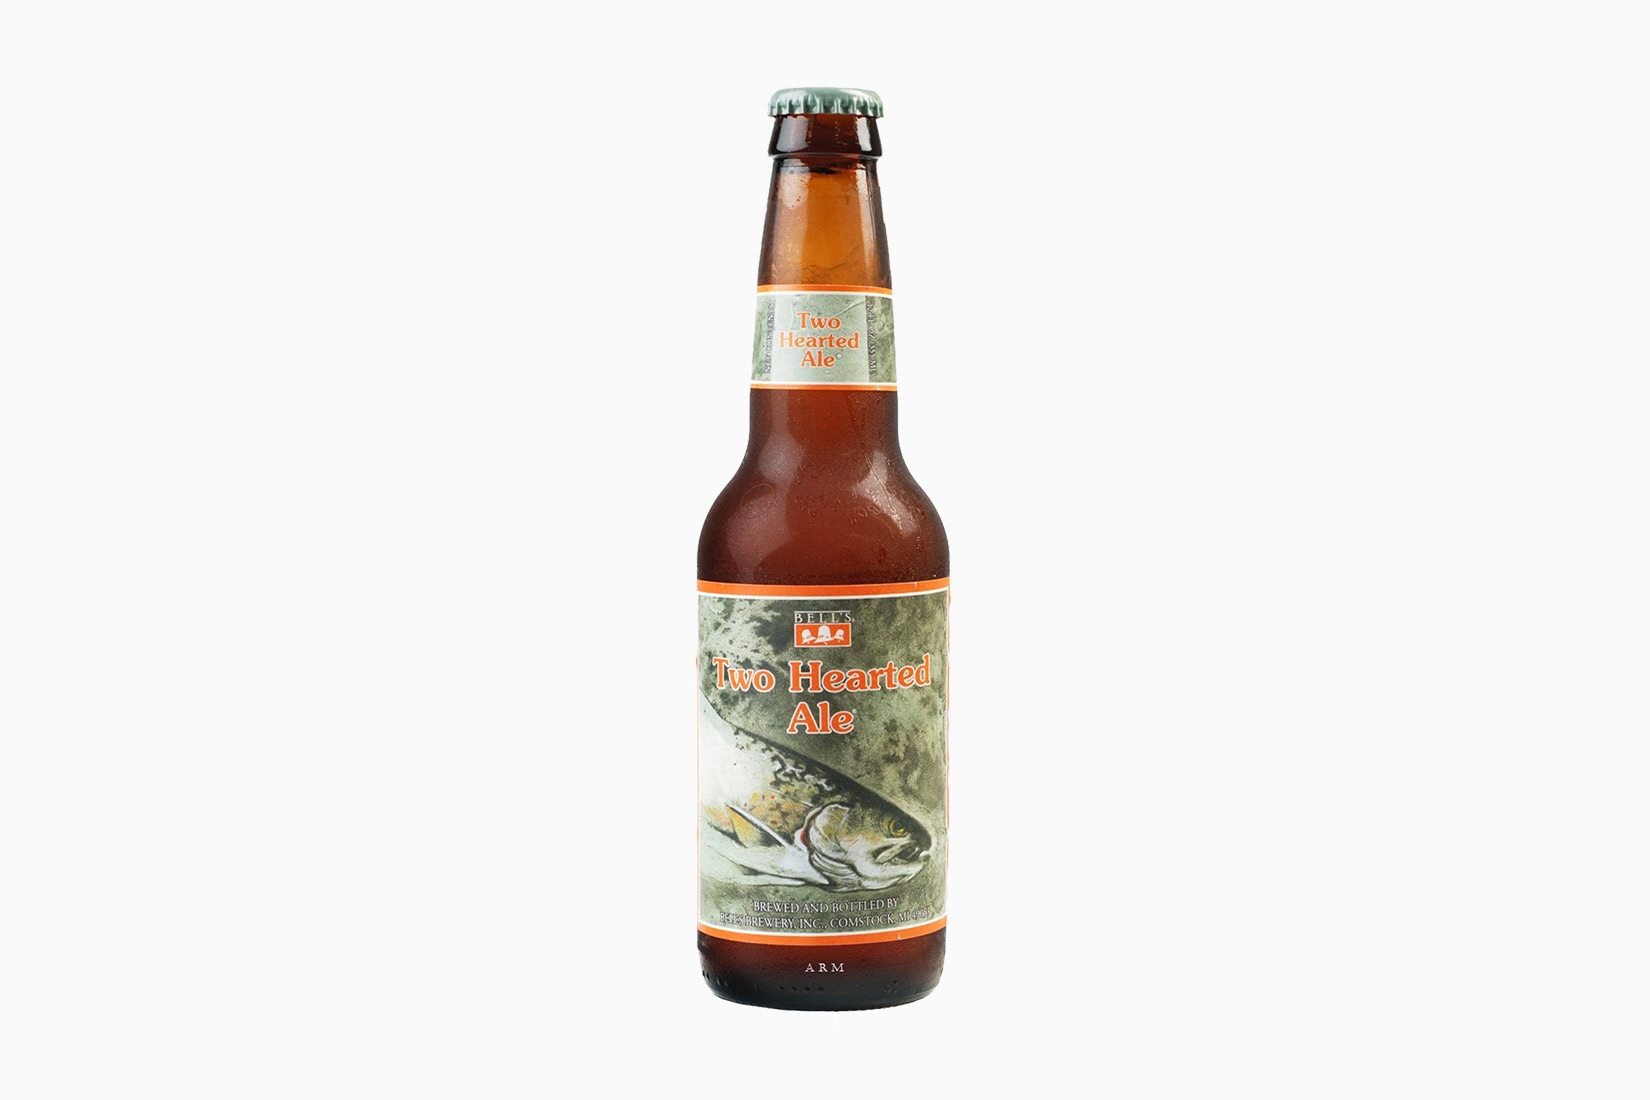 meilleures marques de bière two hearted ipa - Luxe Digital